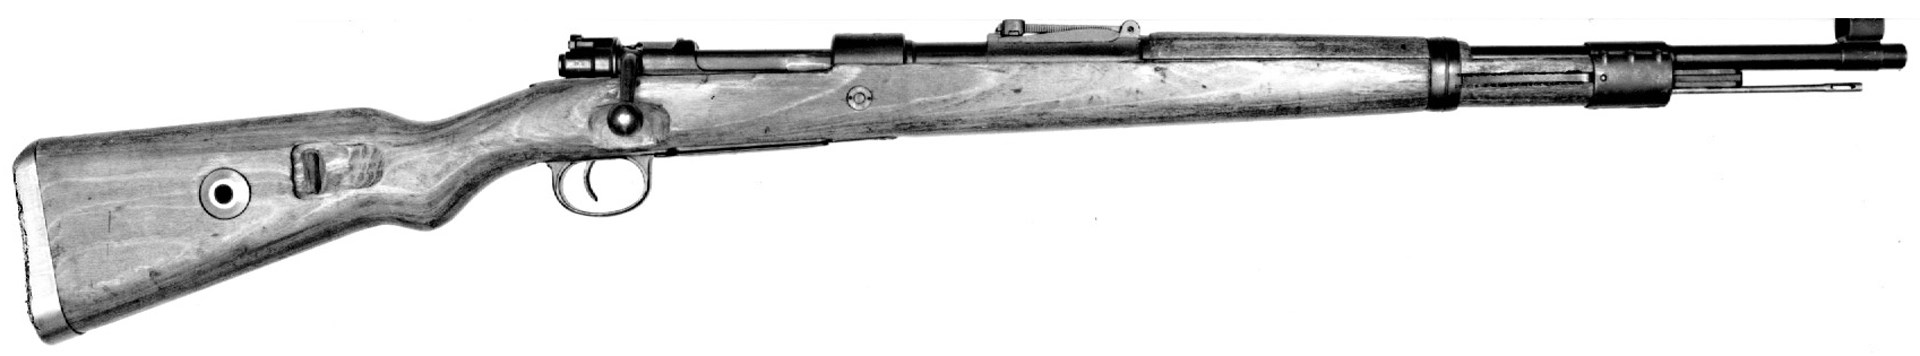 Right-side view of bolt-action mauser world war ii german 7.9 mm carbine black white